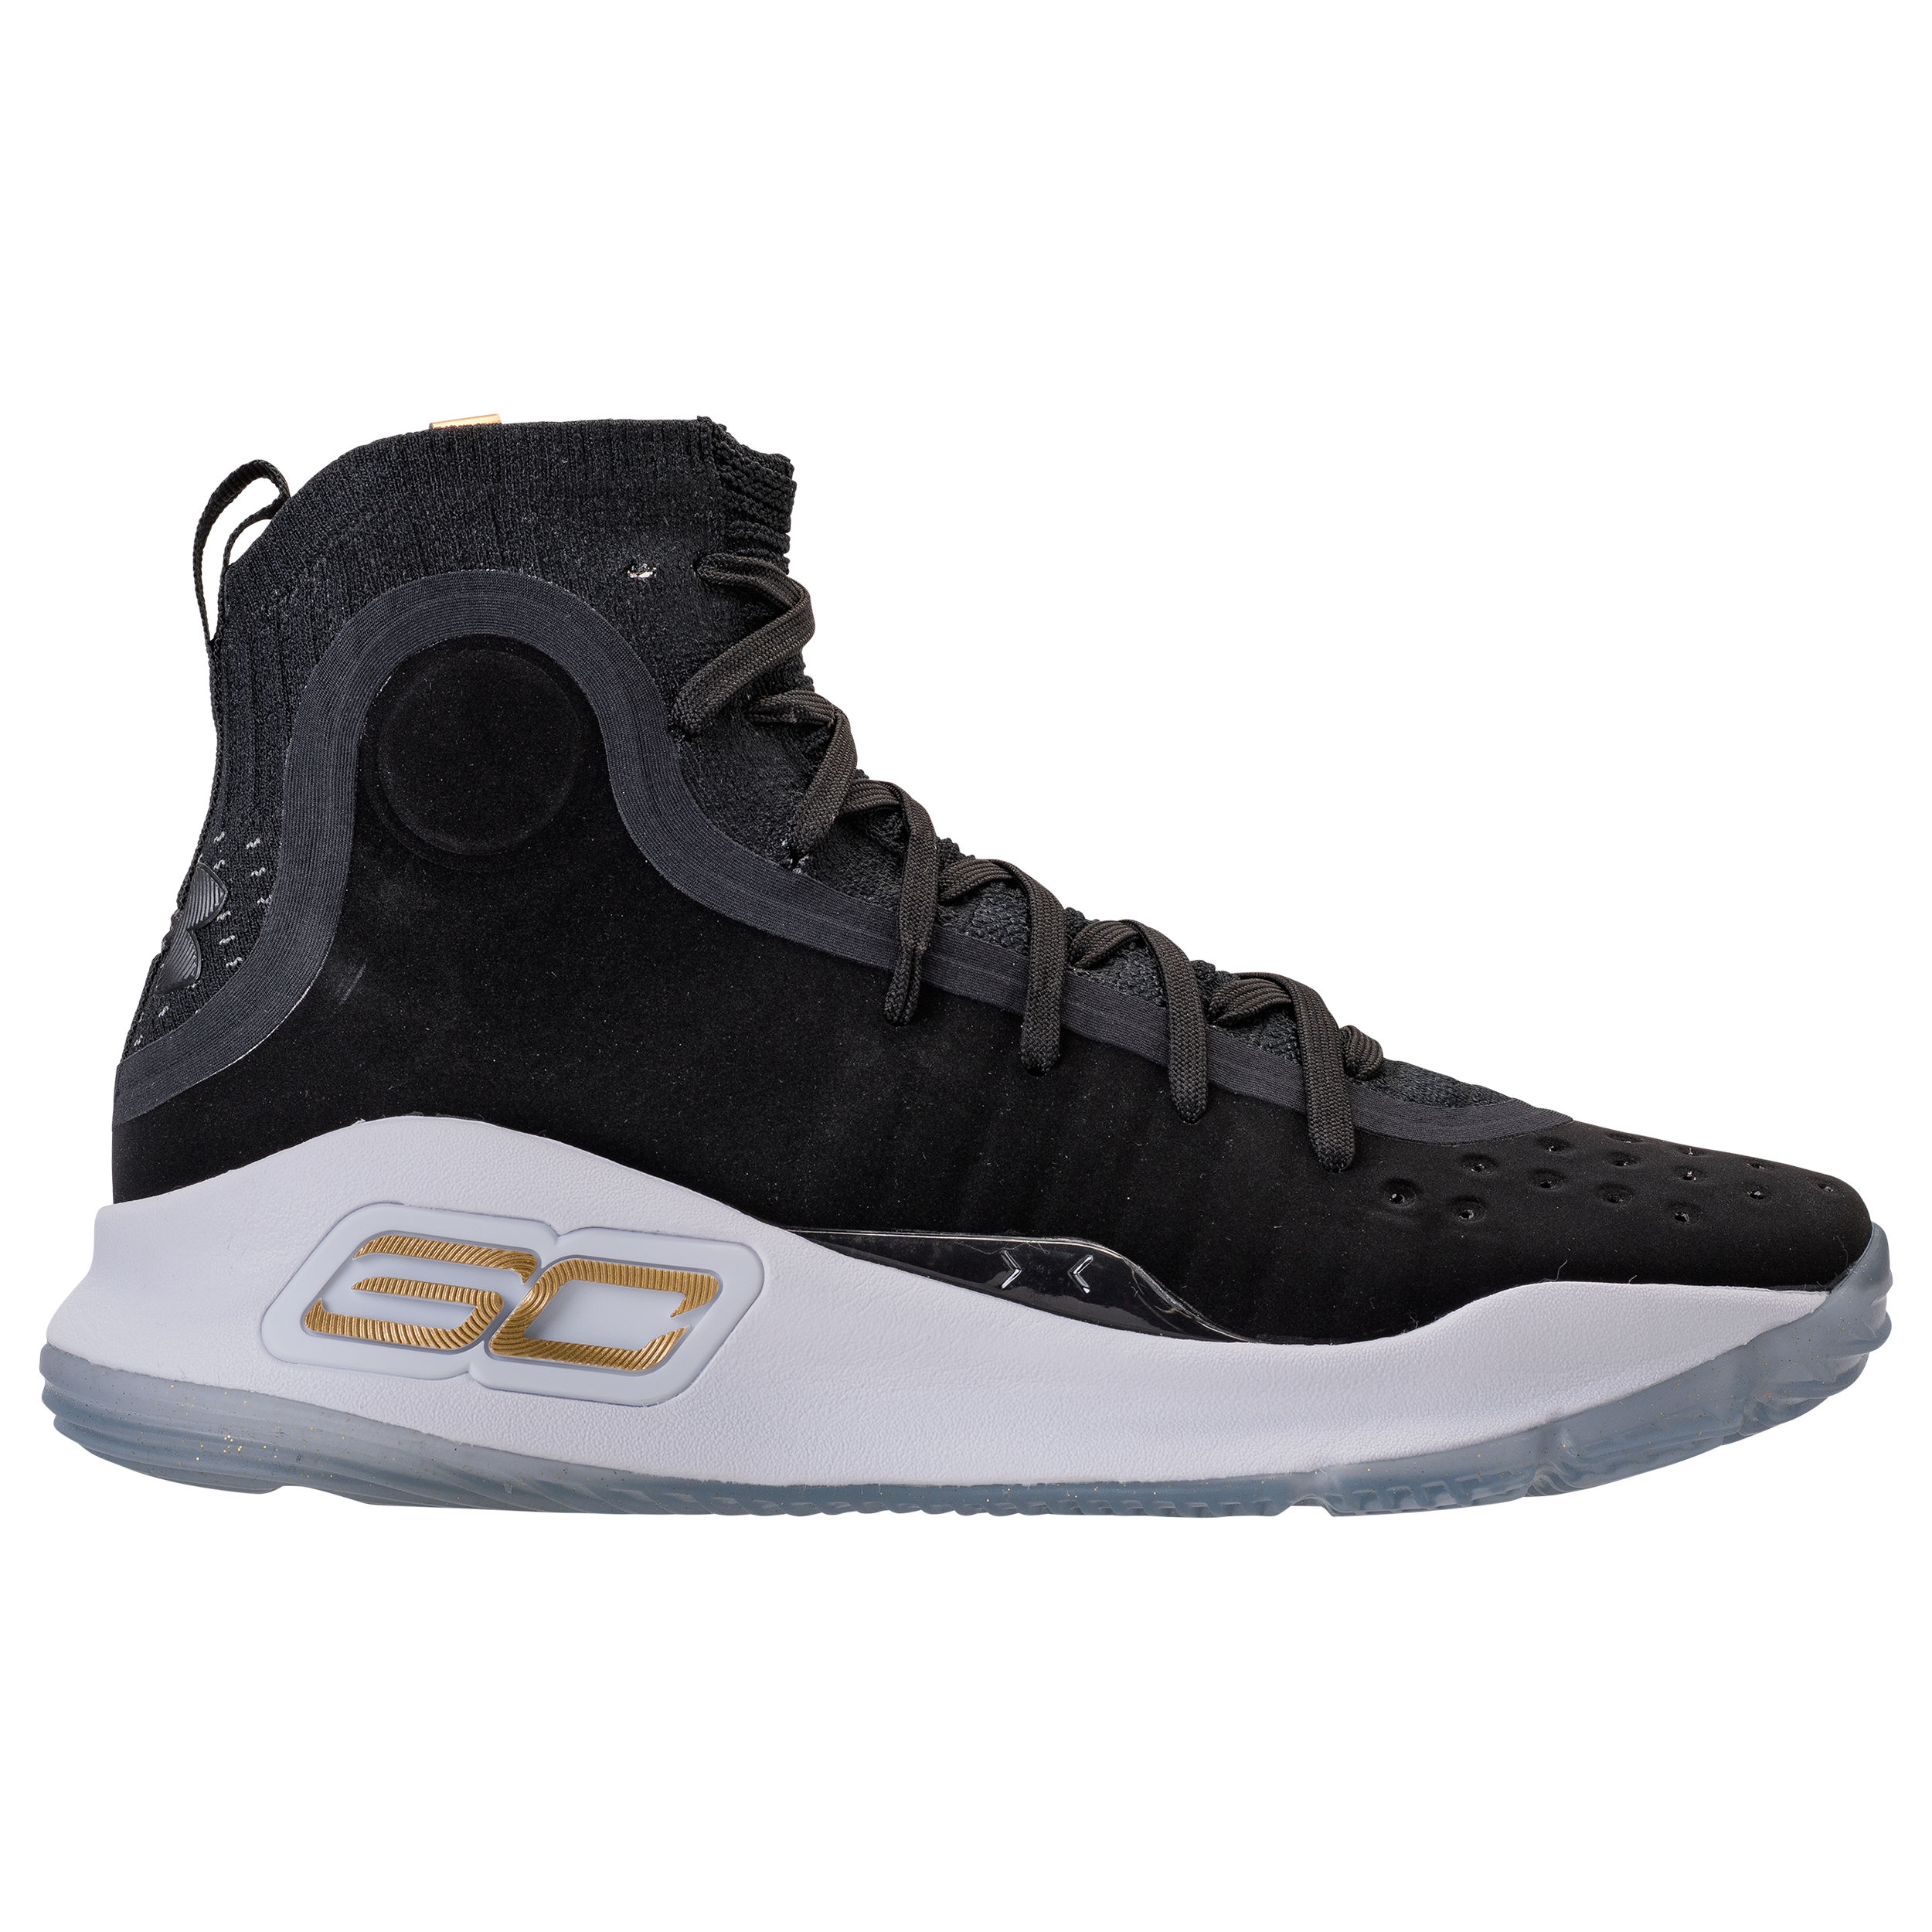 The Second Part of the Curry 4 Champ Pack is Releasing Solo Next Week ...